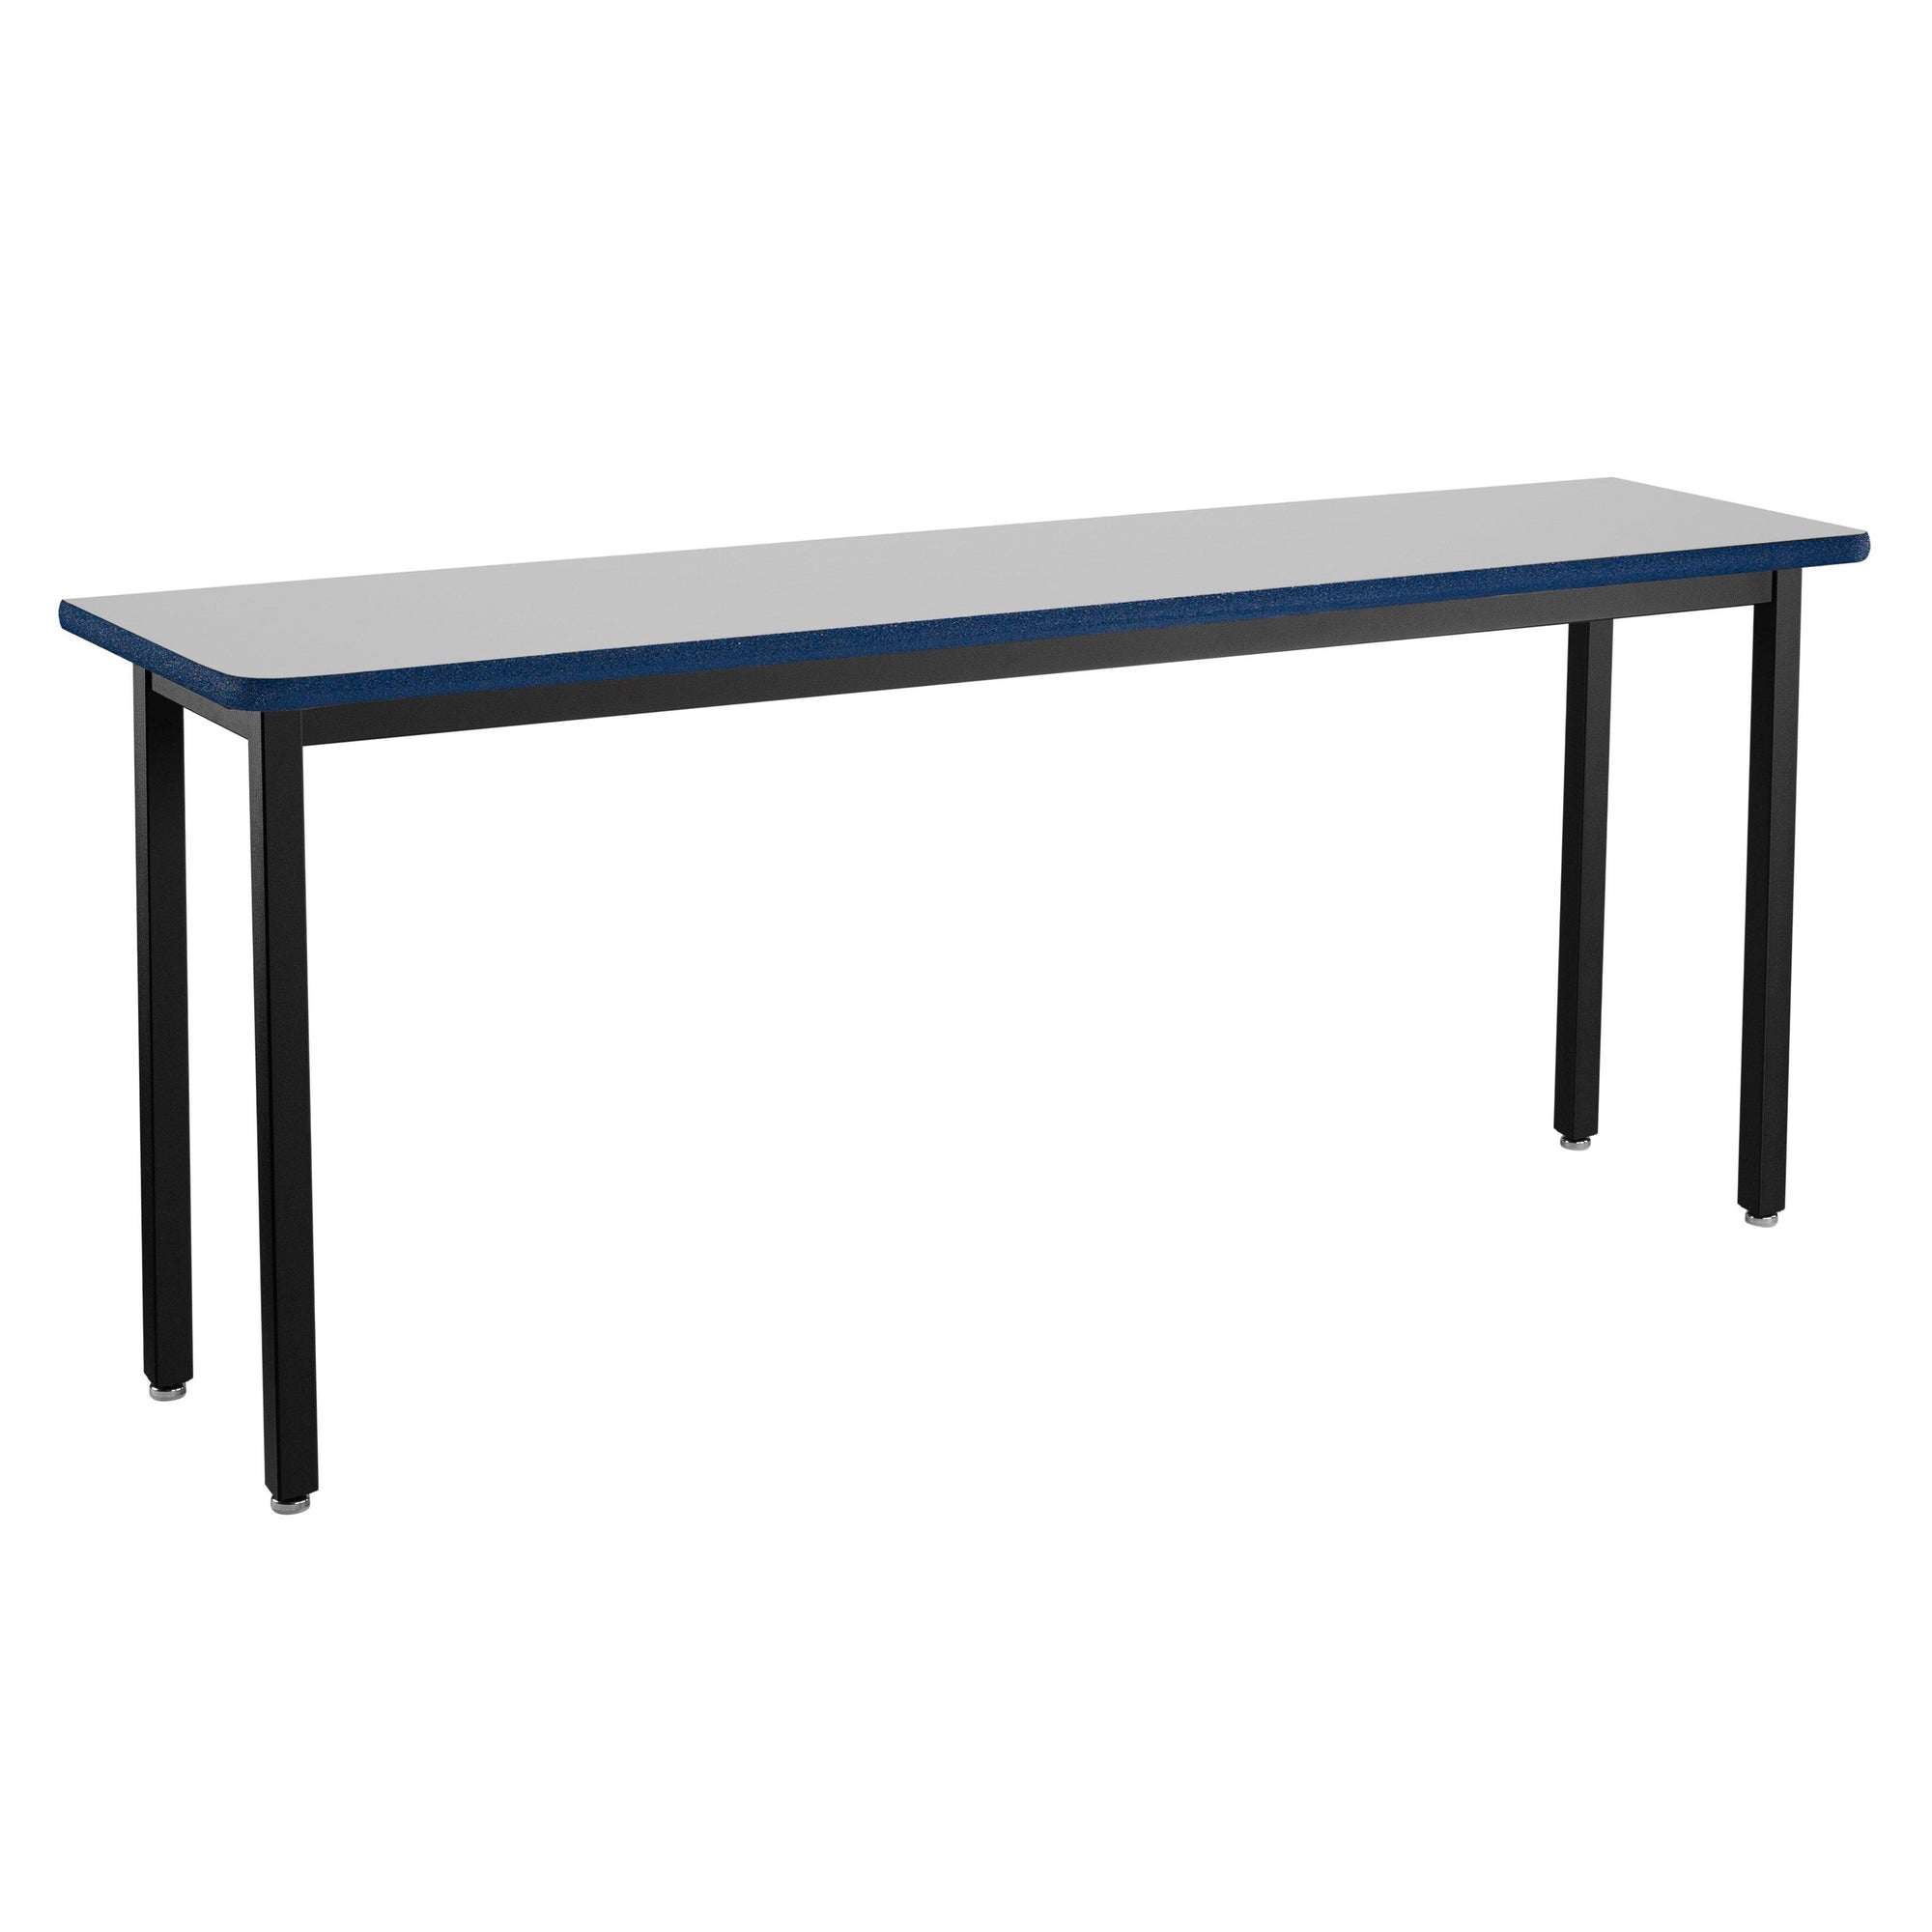 Heavy-Duty Fixed Height Utility Table, Black Frame, 18" x 72", Supreme High-Pressure Laminate Top with Black ProtectEdge